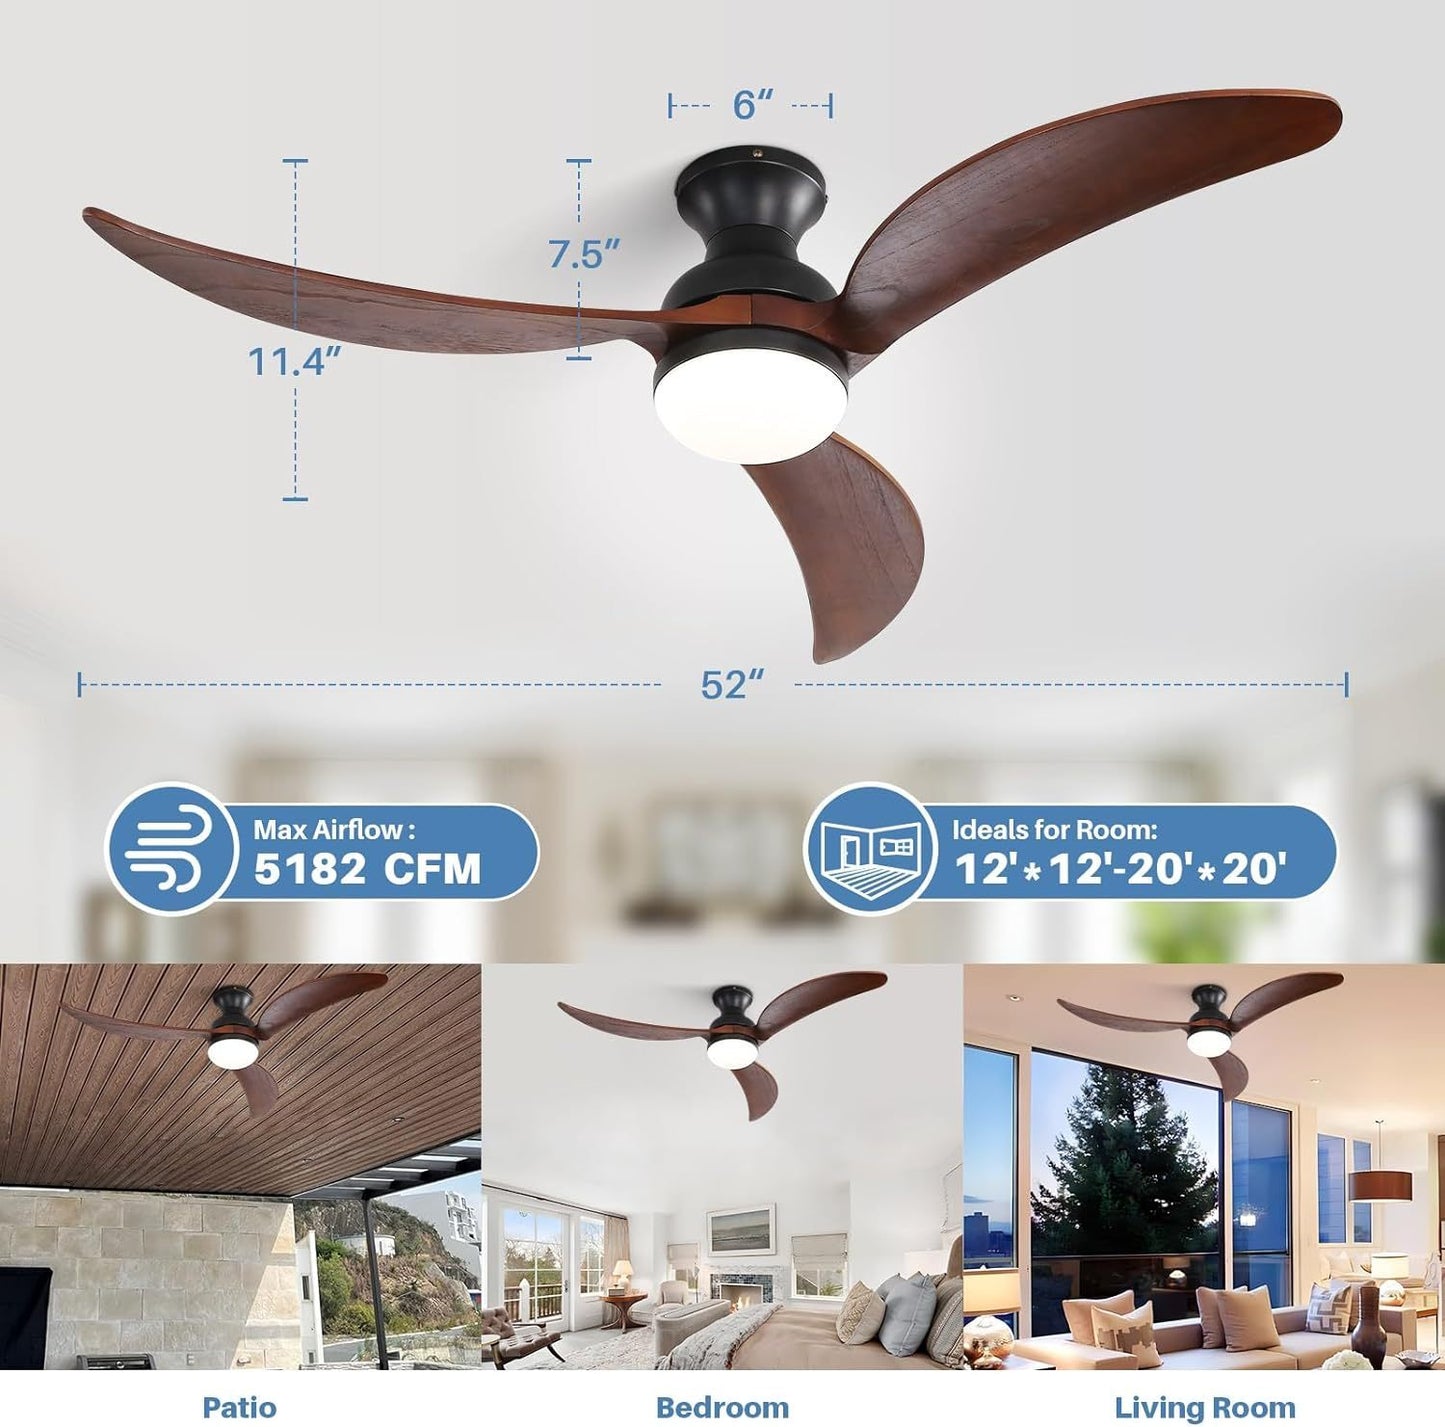 52 Inch Elegant Black Ceiling Fan with Reversible DC Motor and Solid Wood Blades